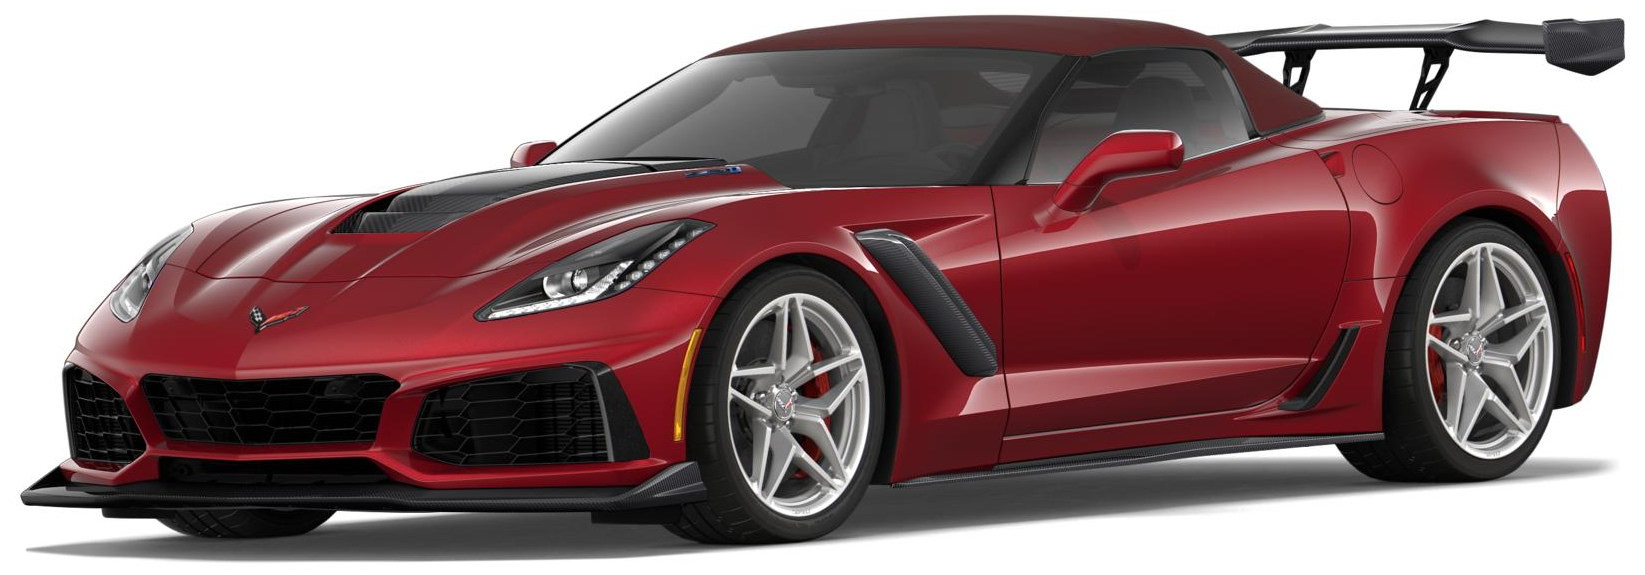 2019 Corvette ZR1 Convertible in Long Beach Red Metallic with the ZTK Track Performance Package